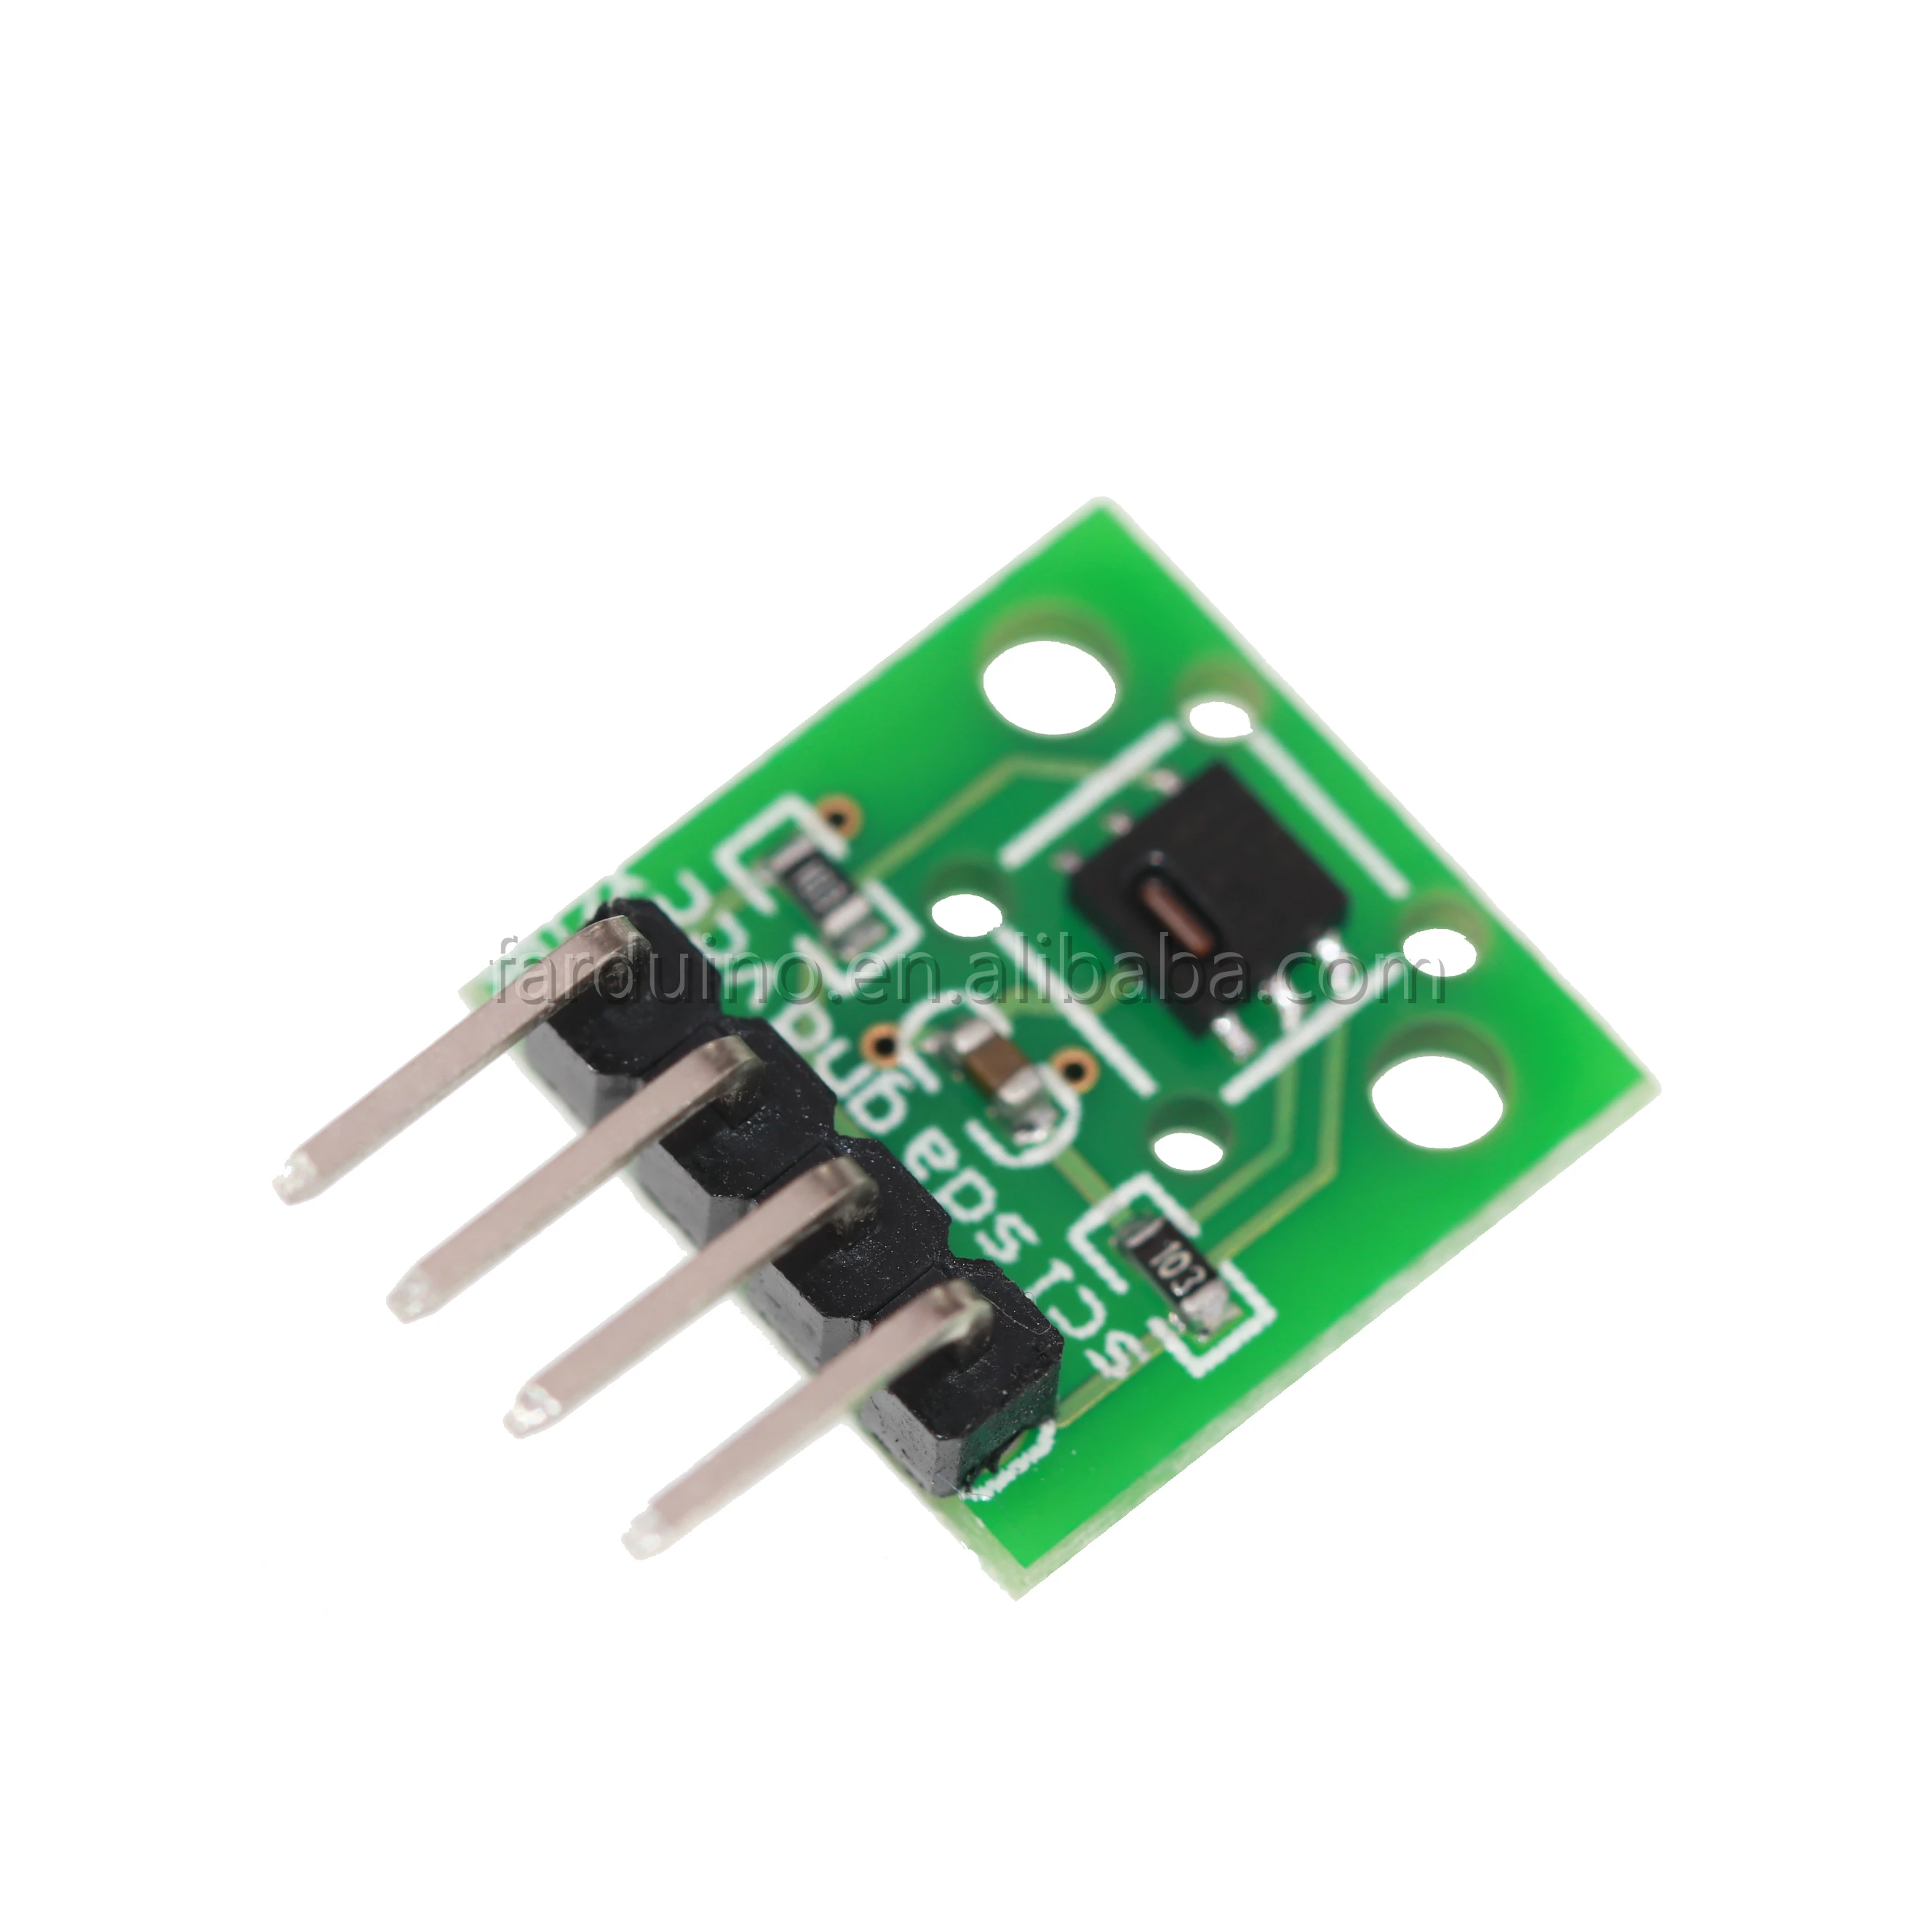 Details about   SHT20 Digital Temperature and Humidity Sensor Module I2C IIC with Board White 